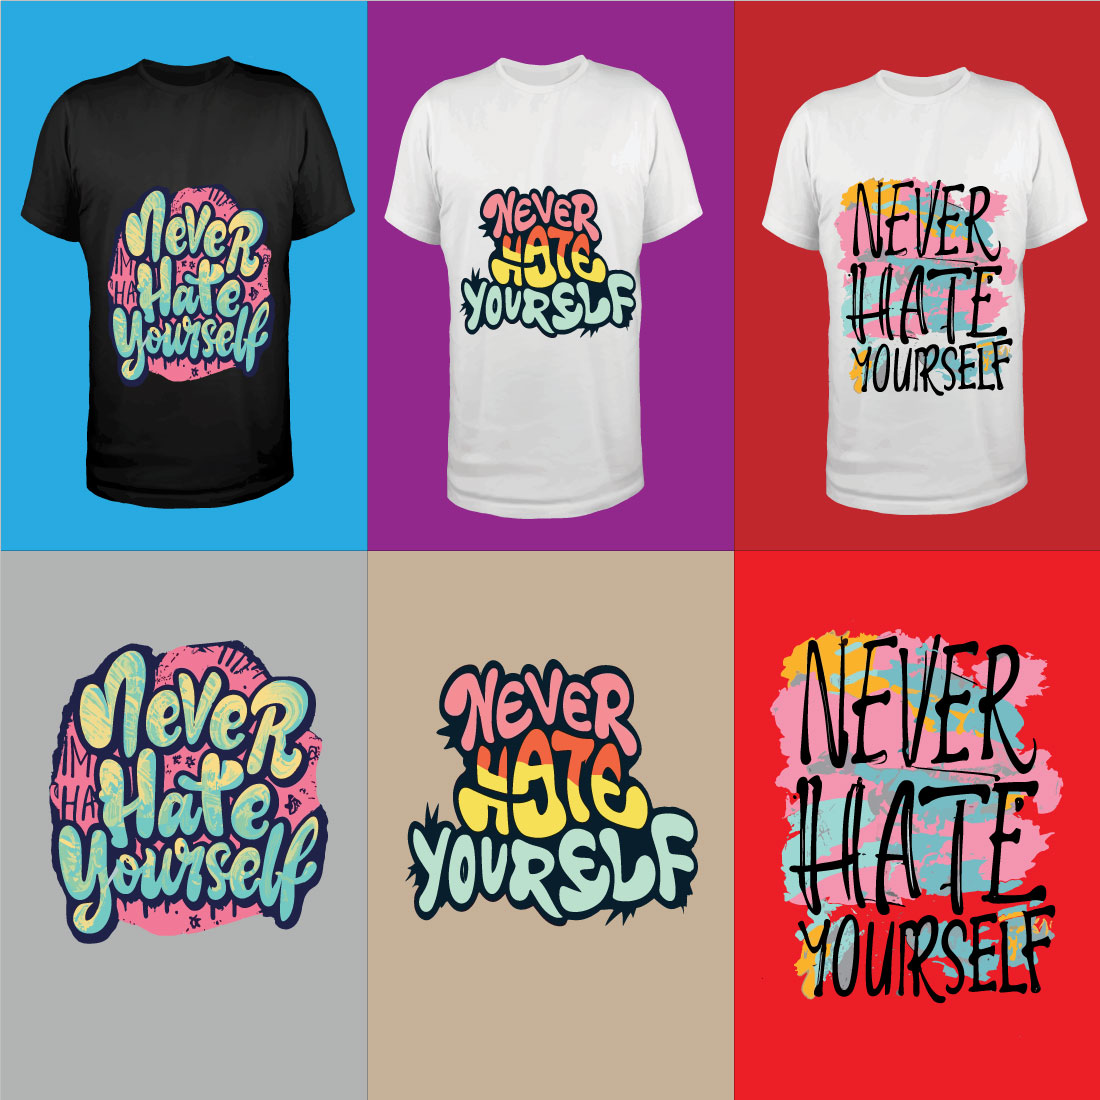 Buddle T-shirt of Never Hate Yourself preview image.